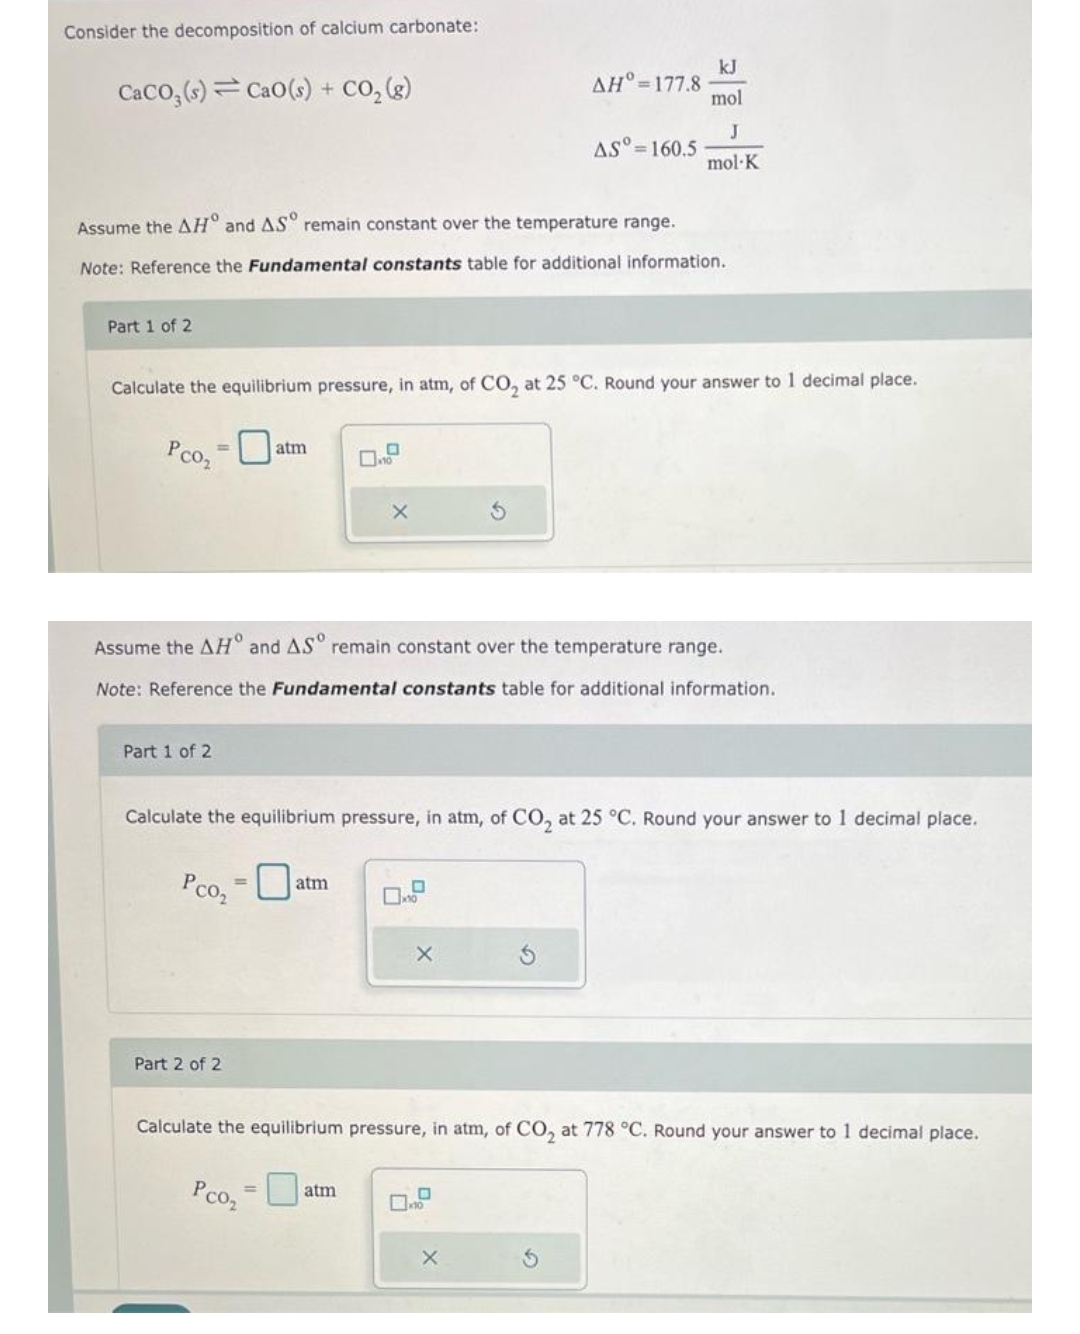 Consider the decomposition of calcium carbonate:
CaCO3(s) CaO (s) + CO₂(g)
Part 1 of 2
Assume the AH and AS remain constant over the temperature range.
Note: Reference the Fundamental constants table for additional information.
Part 1 of 2
atm
Calculate the equilibrium pressure, in atm, of CO₂ at 25 °C. Round your answer to 1 decimal place.
Pco₂ = 0
Part 2 of 2
10
atm
X
Assume the AH° and ASº remain constant over the temperature range.
Note: Reference the Fundamental constants table for additional information.
atm
ΔΗ°=177.8
Calculate the equilibrium pressure, in atm, of CO₂ at 25 °C. Round your answer to 1 decimal place.
Рсог
0
AS°= 160.5
X
kJ
mol
J
mol-K
X
S
Calculate the equilibrium pressure, in atm, of CO₂ at 778 °C. Round your answer to 1 decimal place.
Pco₂ = 0